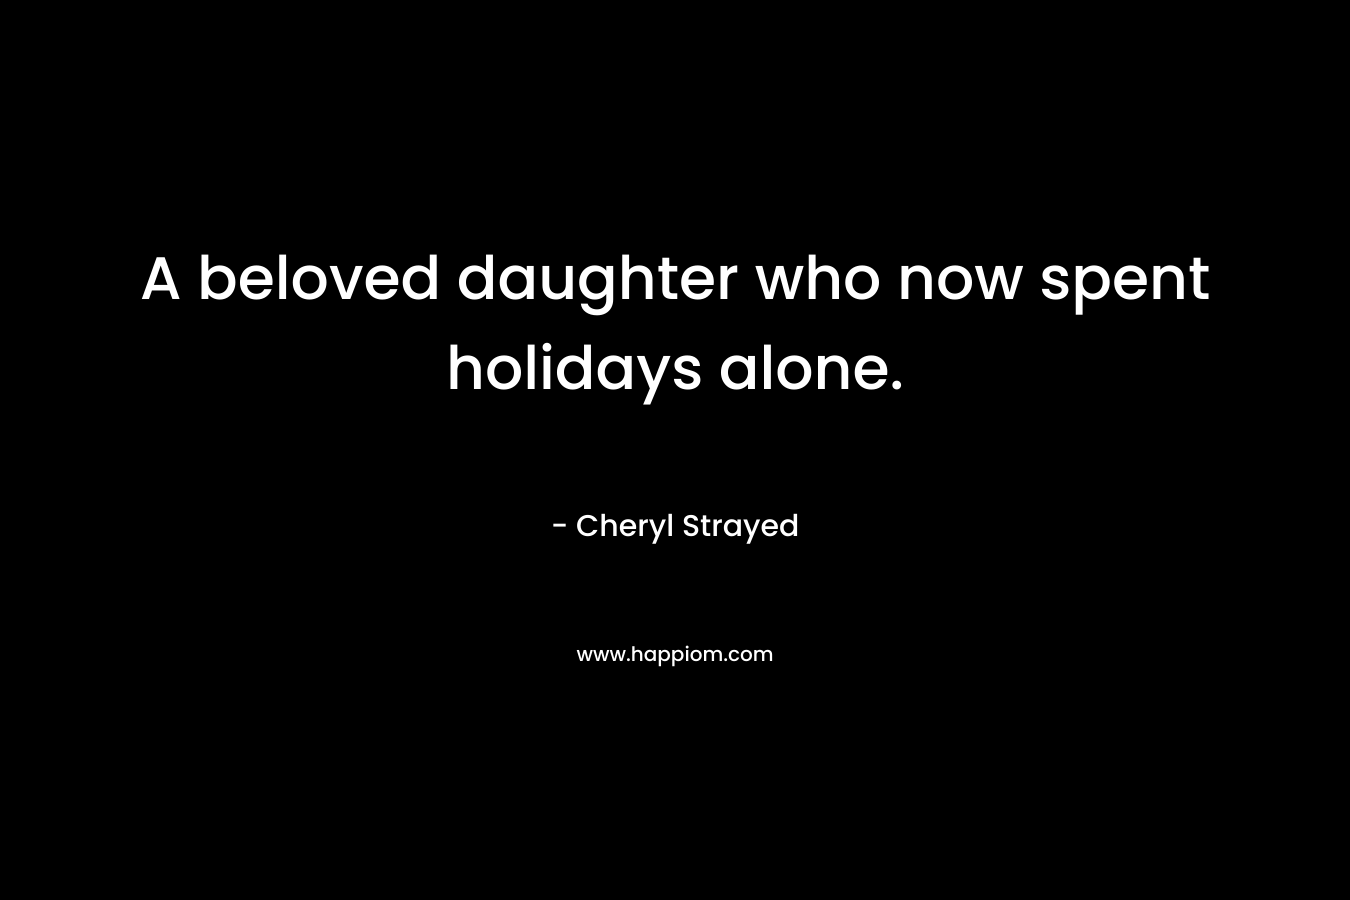 A beloved daughter who now spent holidays alone. – Cheryl Strayed